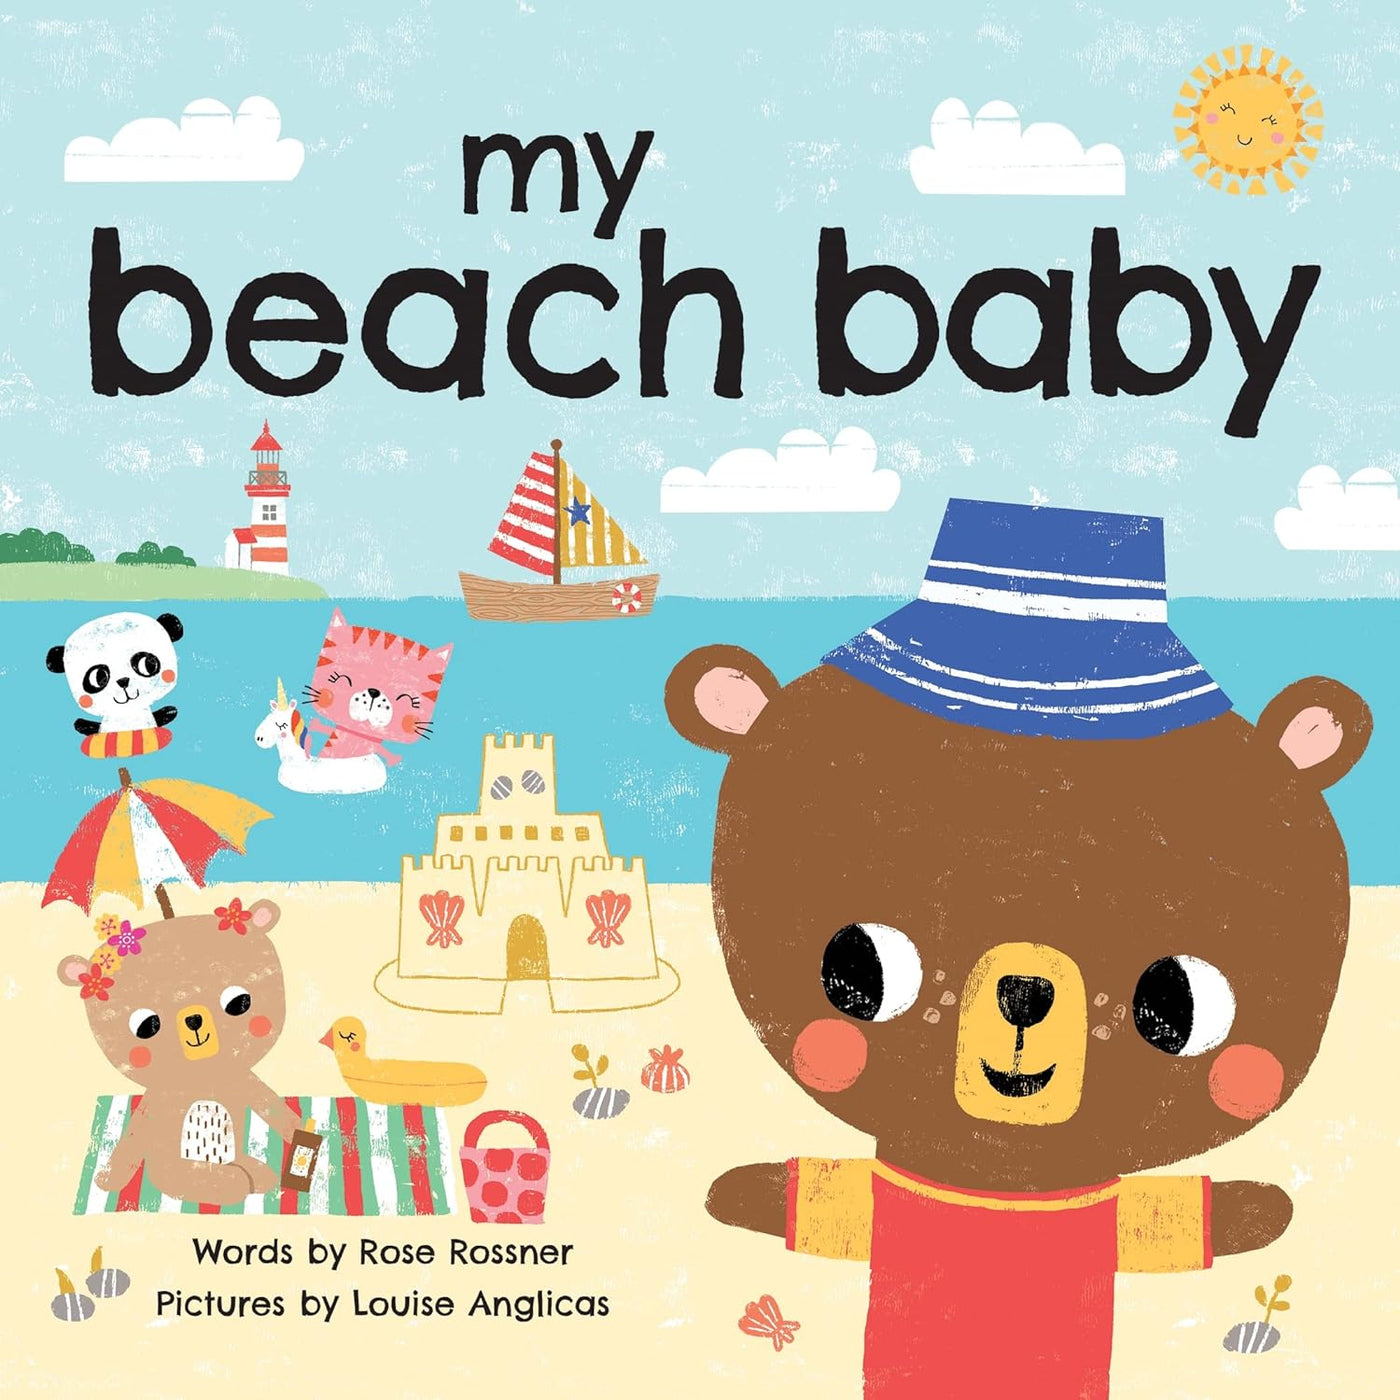 My Beach Baby: Swim in the Sun, Build Sandcastles, and Say I Love You!